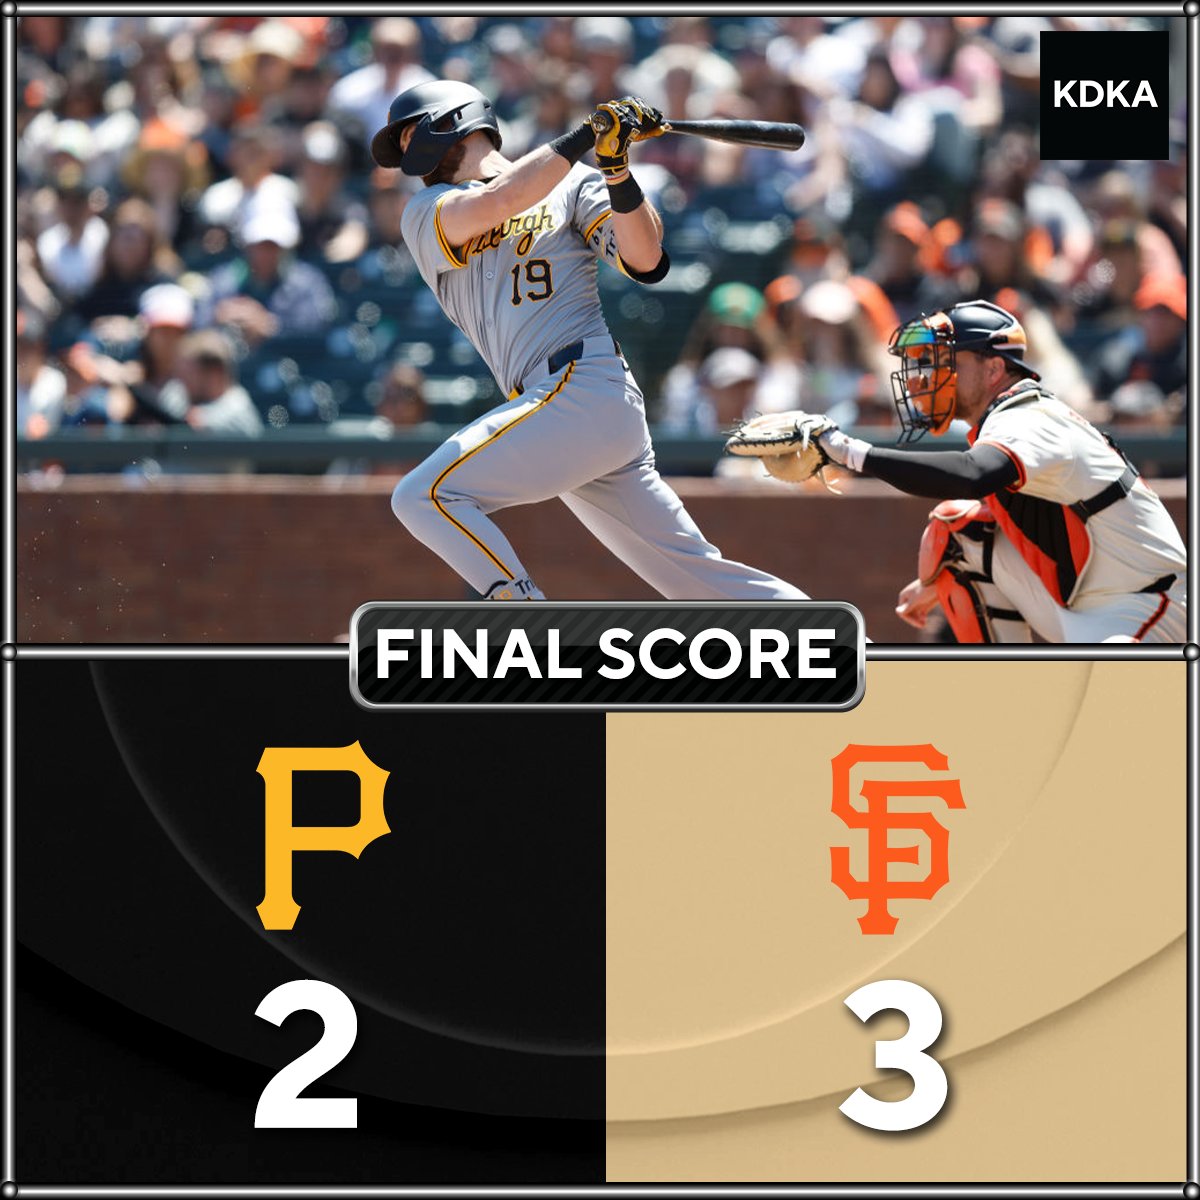 Thairo Estrada and Mike Yastrzemski hit back-to-back home runs in the third inning, and rookie right-hander Keaton Winn delivered another strong start to lead the San Francisco Giants to a 3-2 victory and a series win over the Pittsburgh Pirates. RECAP: cbsn.ws/3wbeLt4